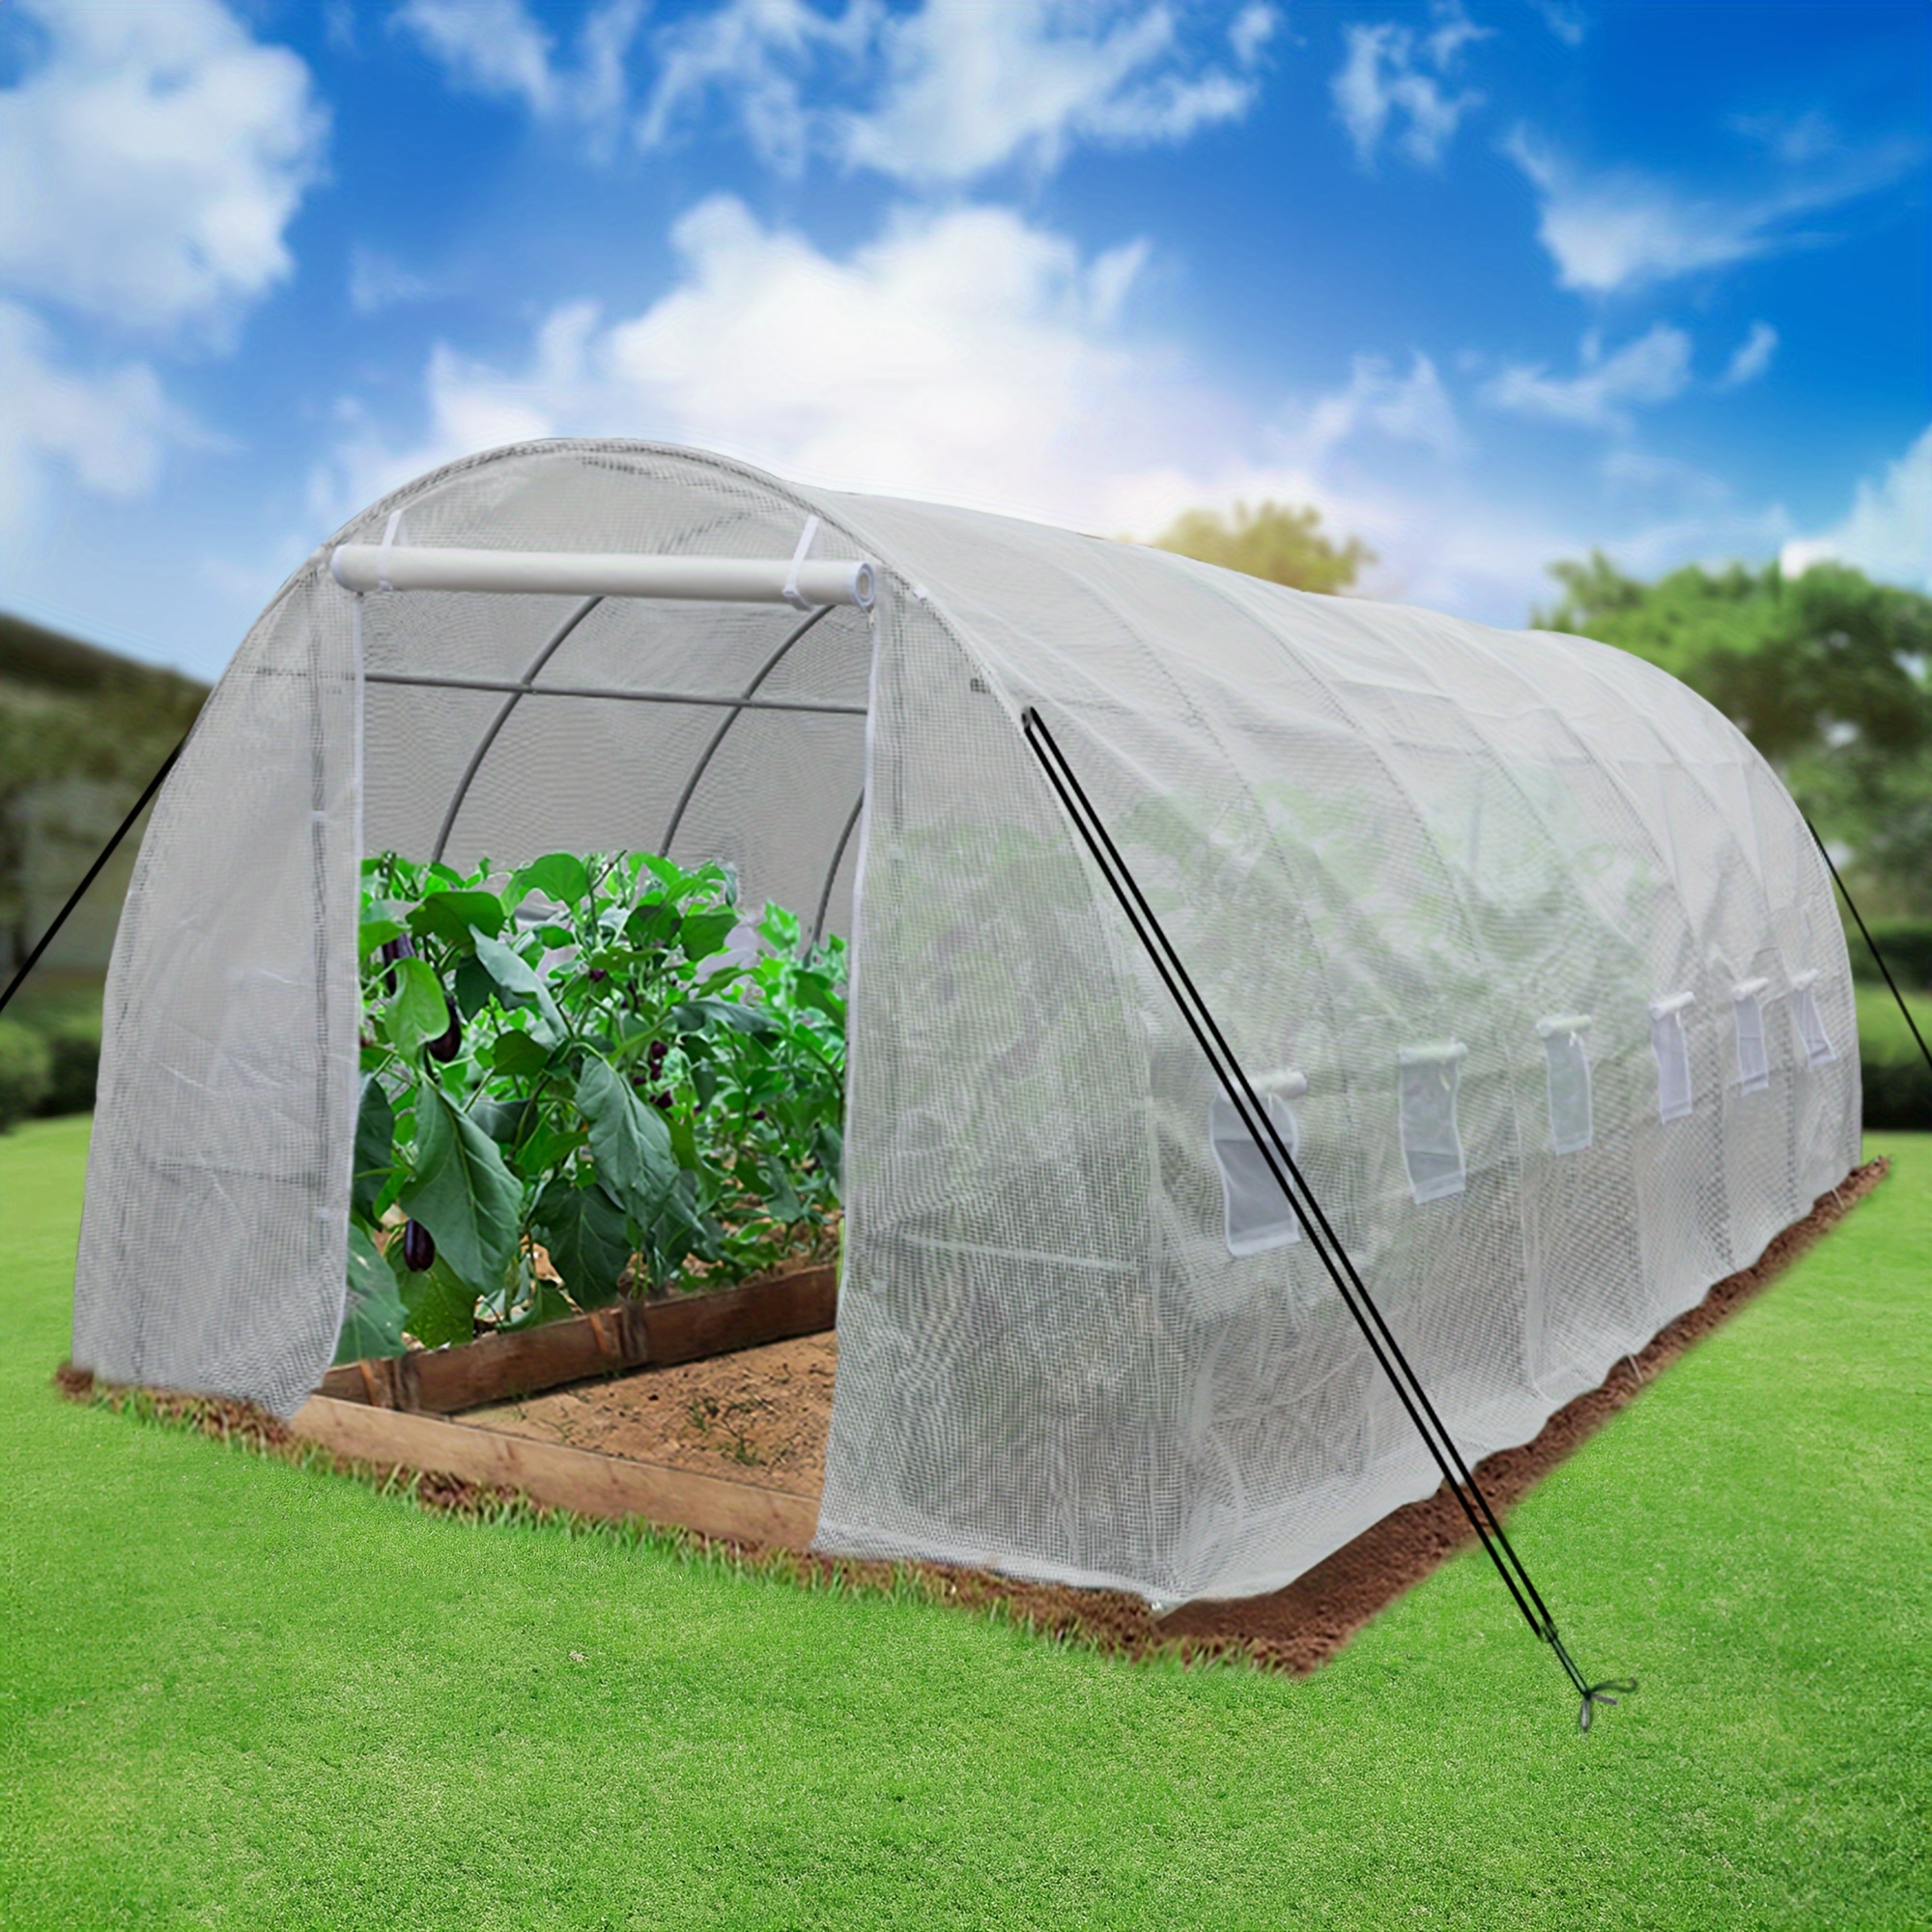 

Furnizest 20x10x7ft Greenhouse Outdoor Heavy Duty Greenhouses Outside Large Walk-in Tunnel Green Houses Gardening Galvanized Steel Stake Ropes Zipper Door 7 Crossbars Garden, White